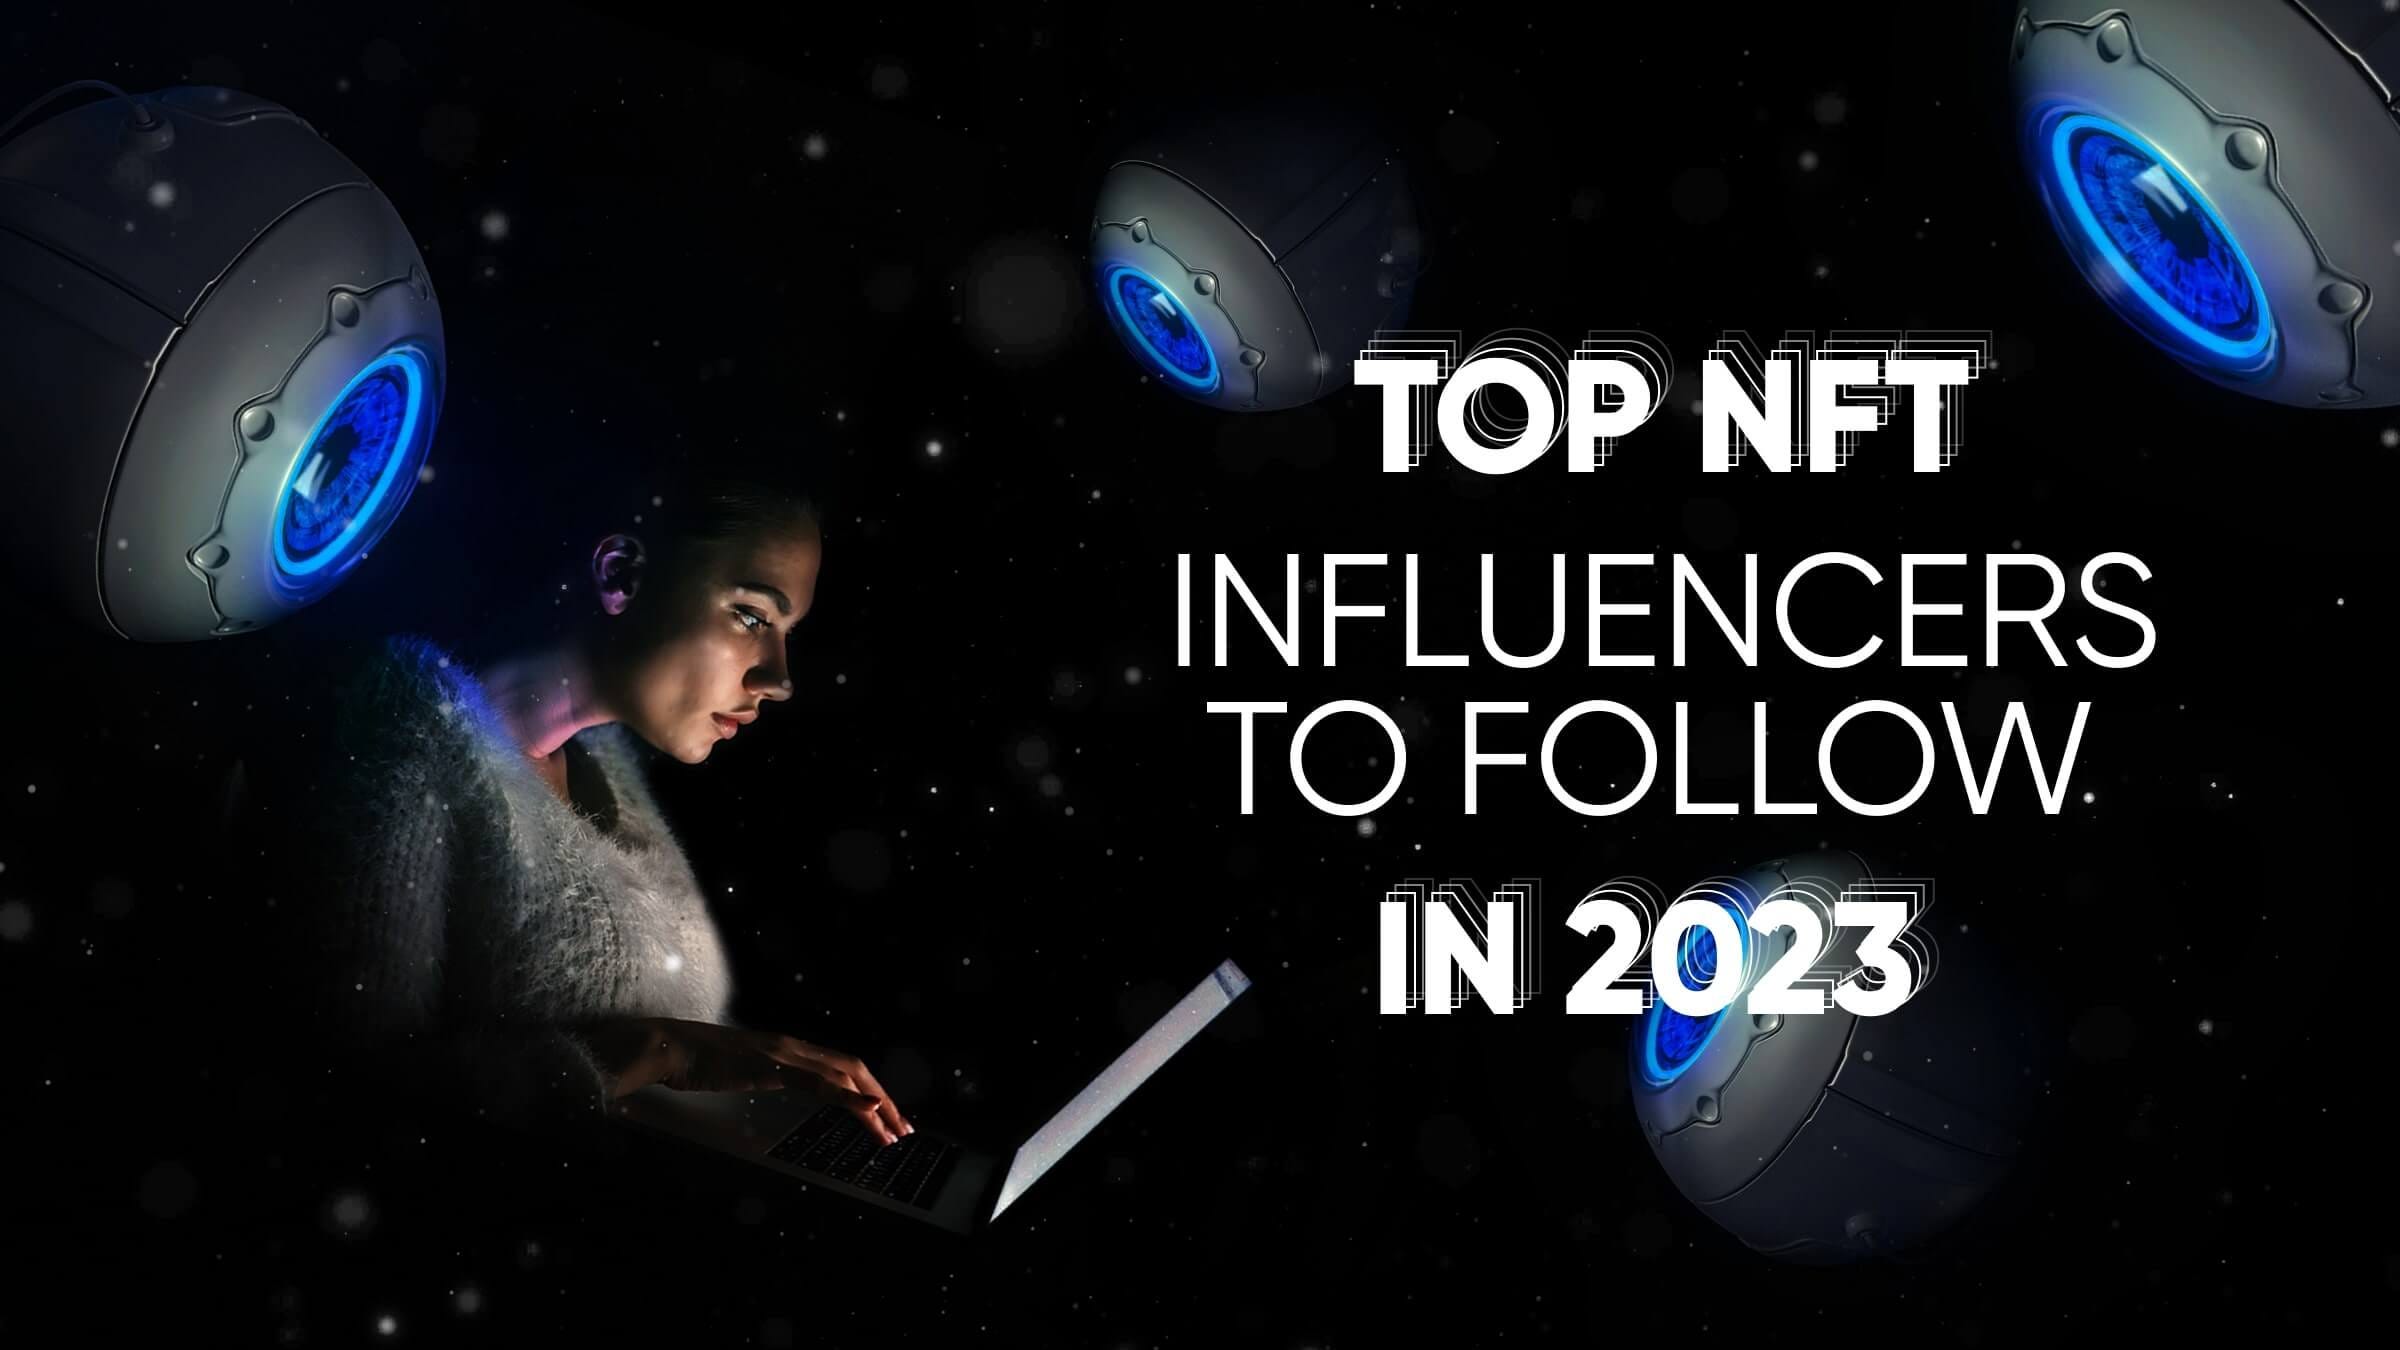 NFT Influencers on Twitter: Follow and Stay Updated!